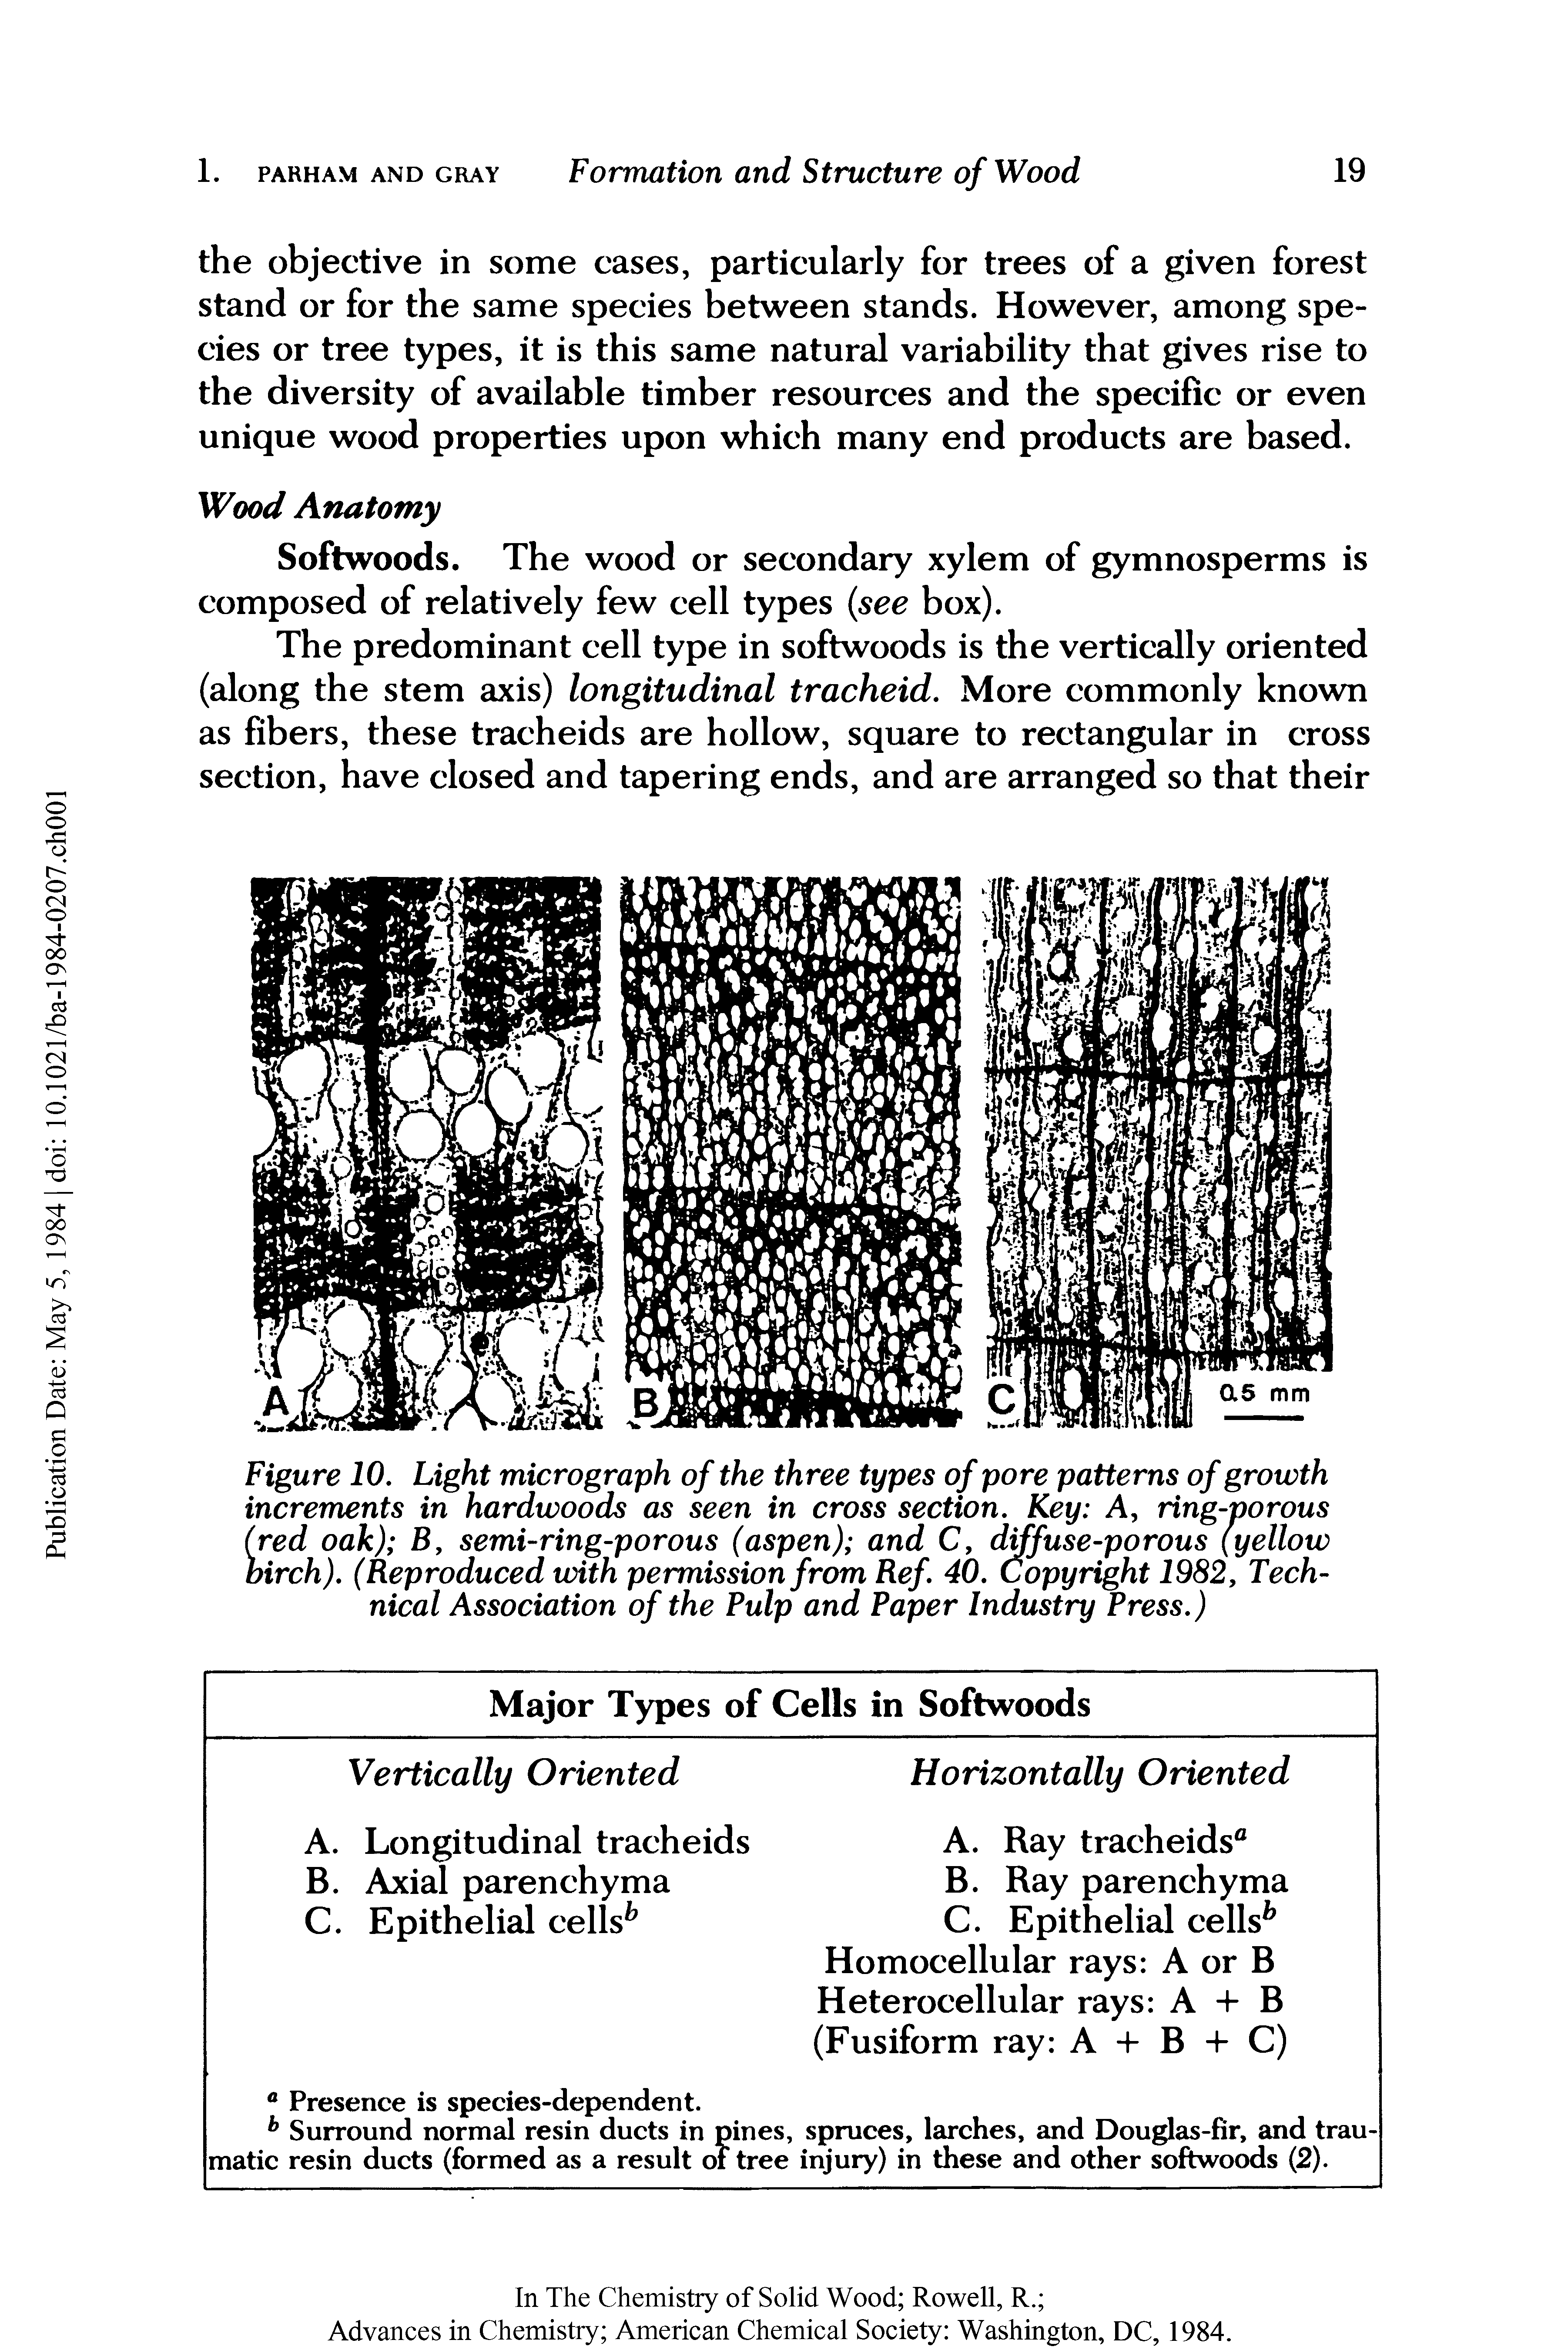 Figure 10. Light micrograph of the three types of pore patterns of growth increments in hardwoods as seen in cross section. Key A, ring-porous (red oak) B, semi-ring-porous (aspen) and C, diffuse-porous (yellow birch). (Reproduced with permission from Ref. 40. Copyright 1982, Technical Association of the Pulp and Paper Industry Press.)...